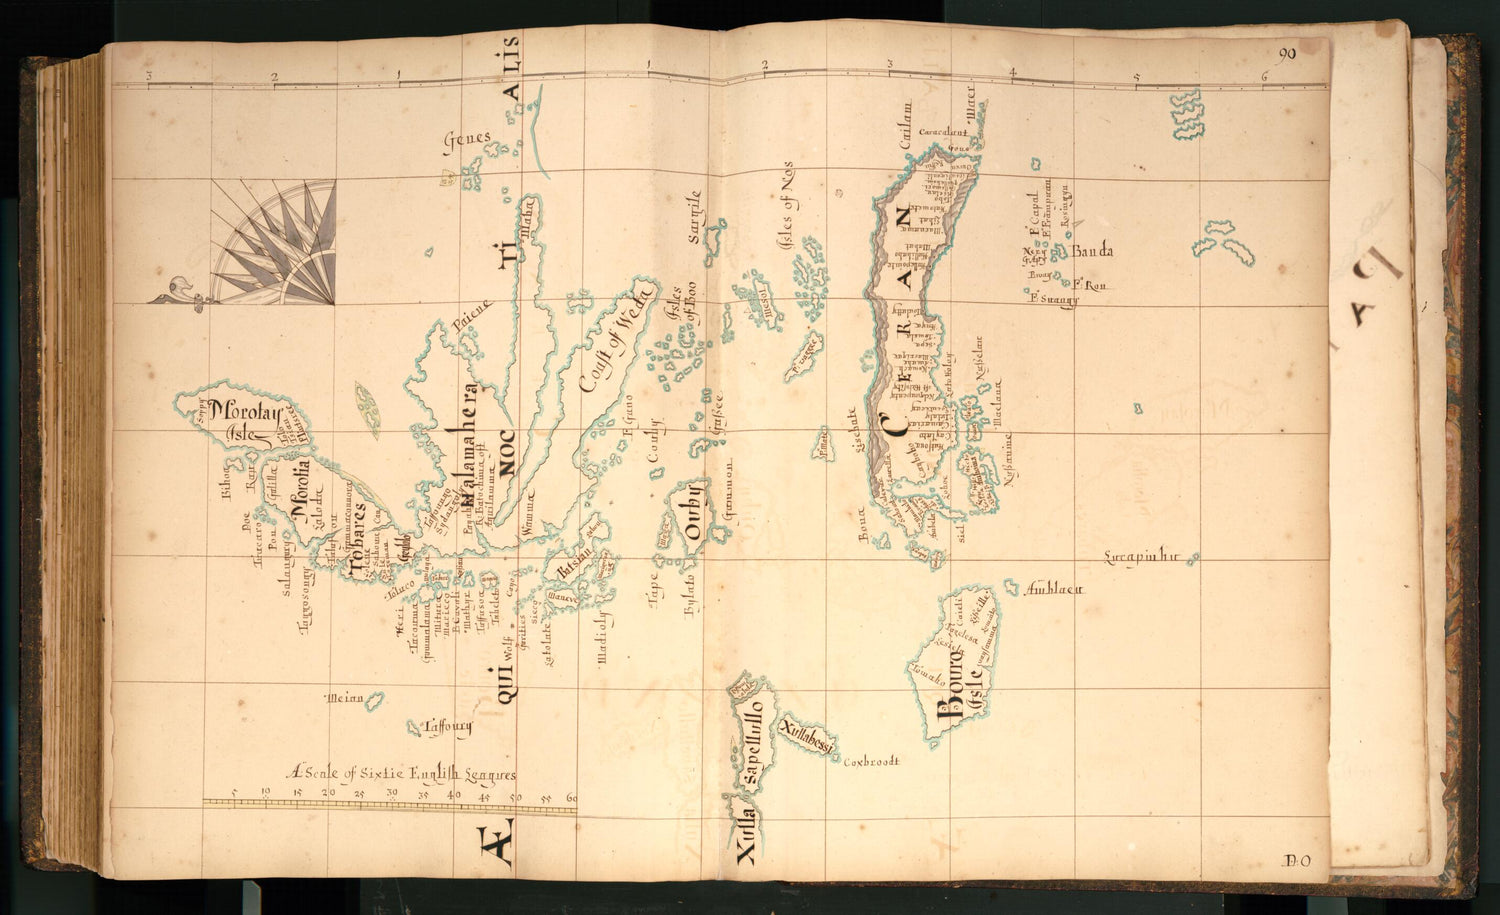 This old map of 90) Islands from Buccaneer Atlas from 1690 was created by William Hacke in 1690